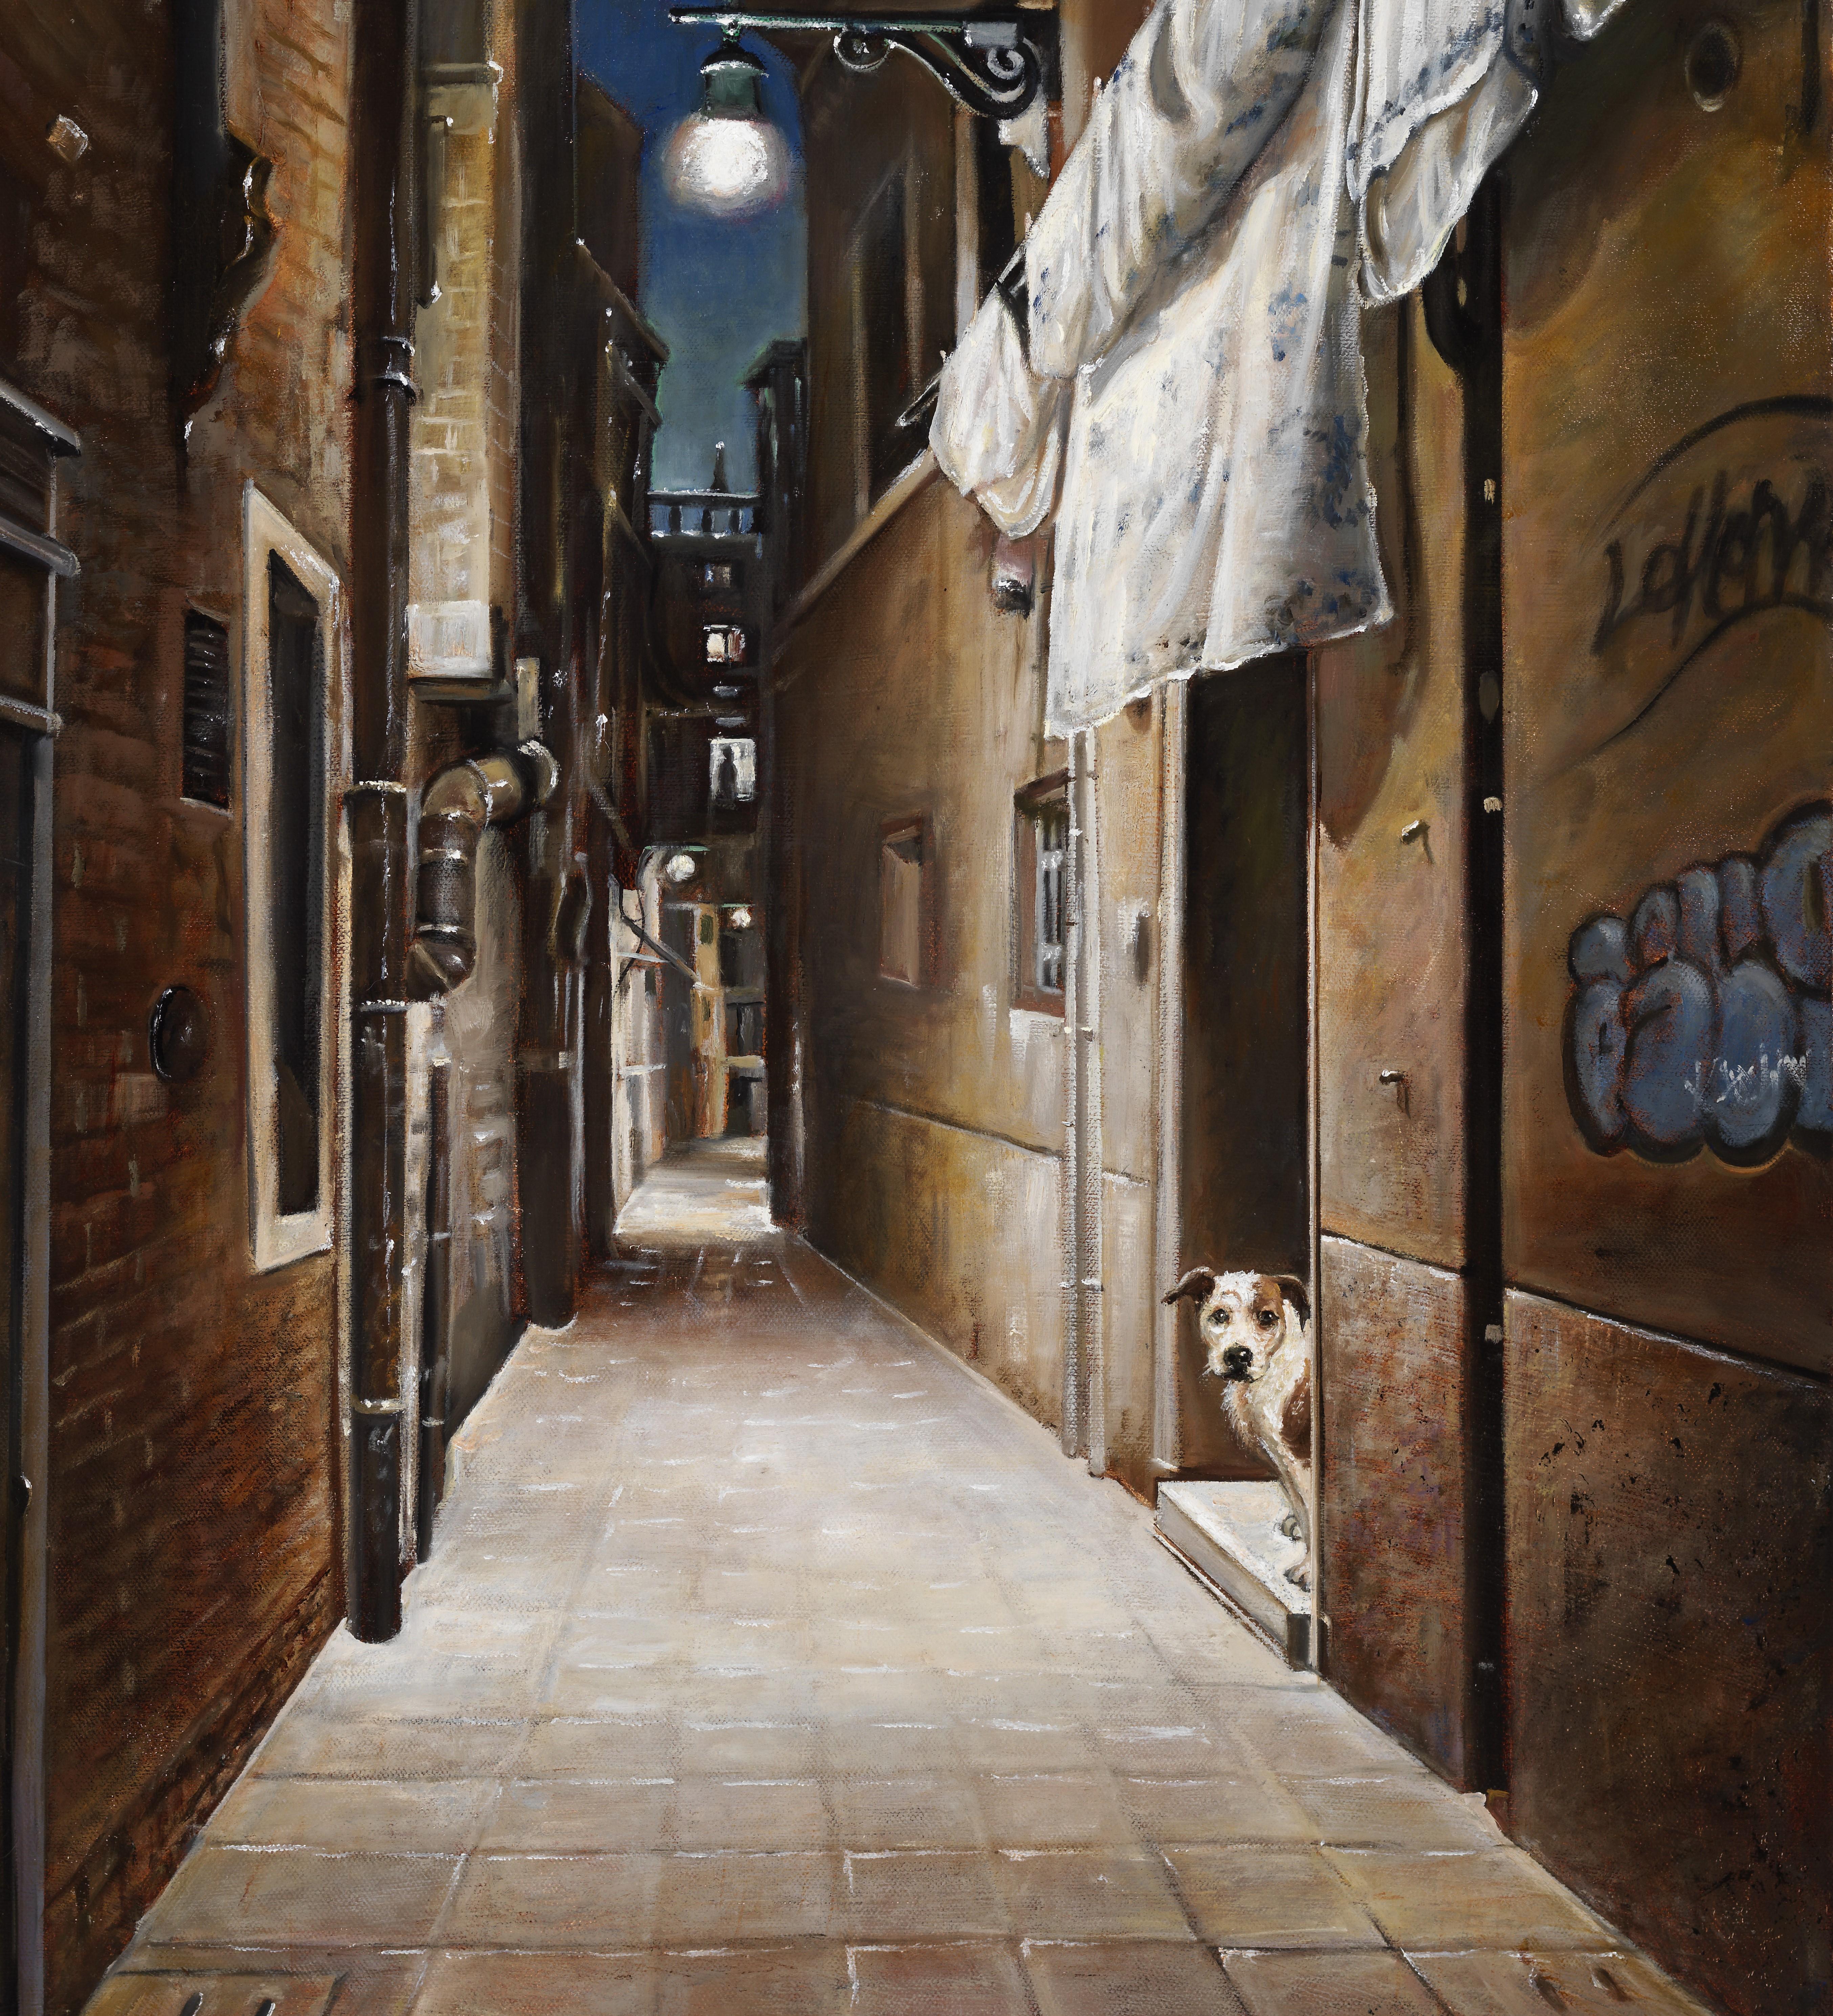 The Lost Dog of Venice - Back Streets, Nighttime Scene Original Oil on Canvas - Painting by Bruno Surdo